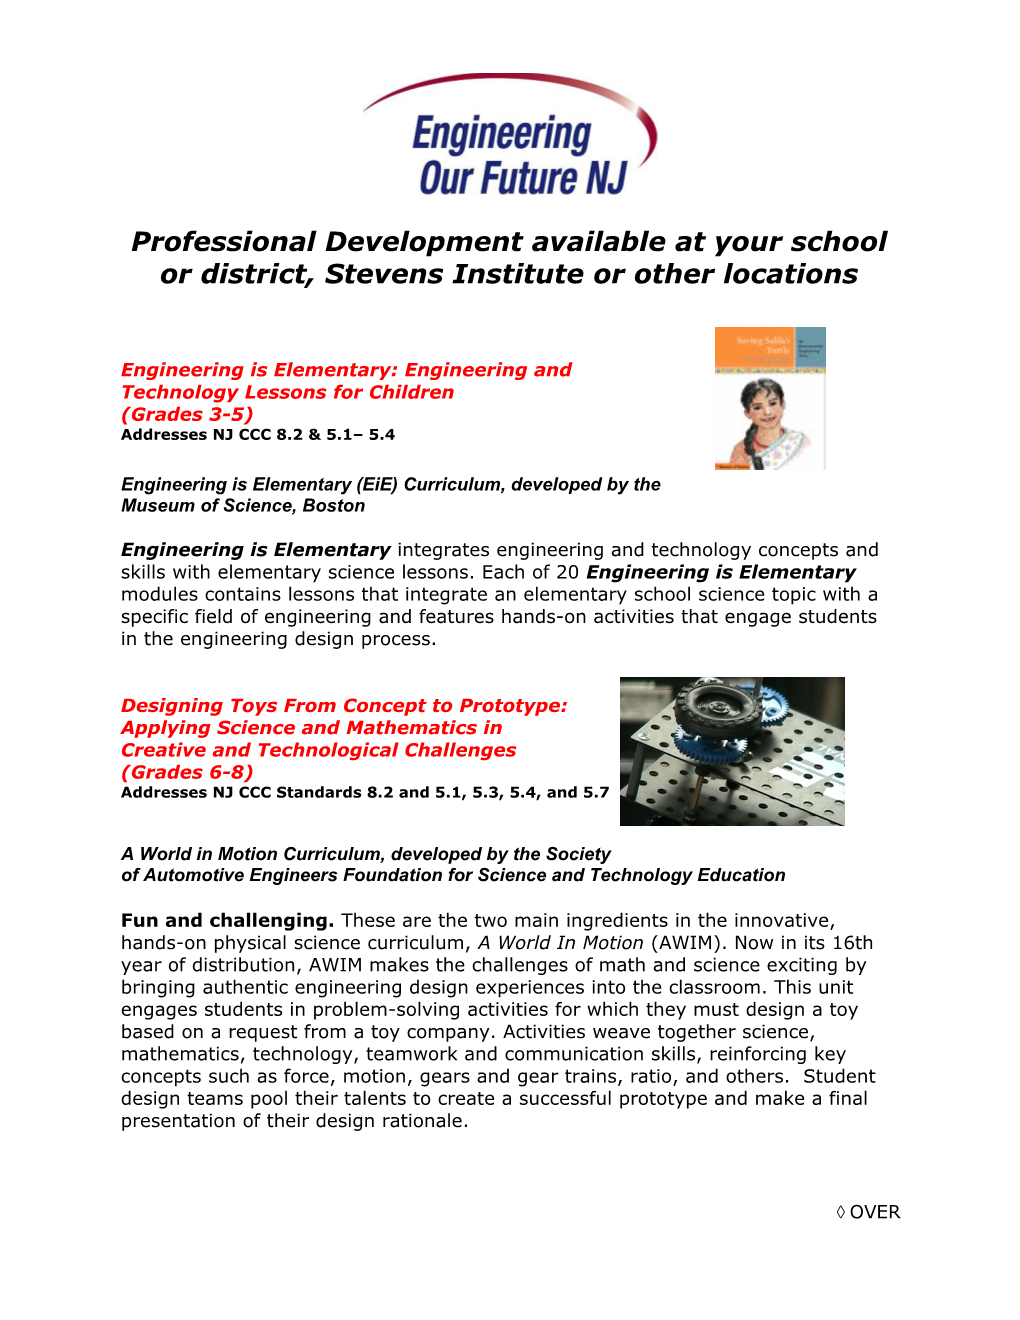 Professional Development Available at Your School Or District, Stevens Institute Or Other